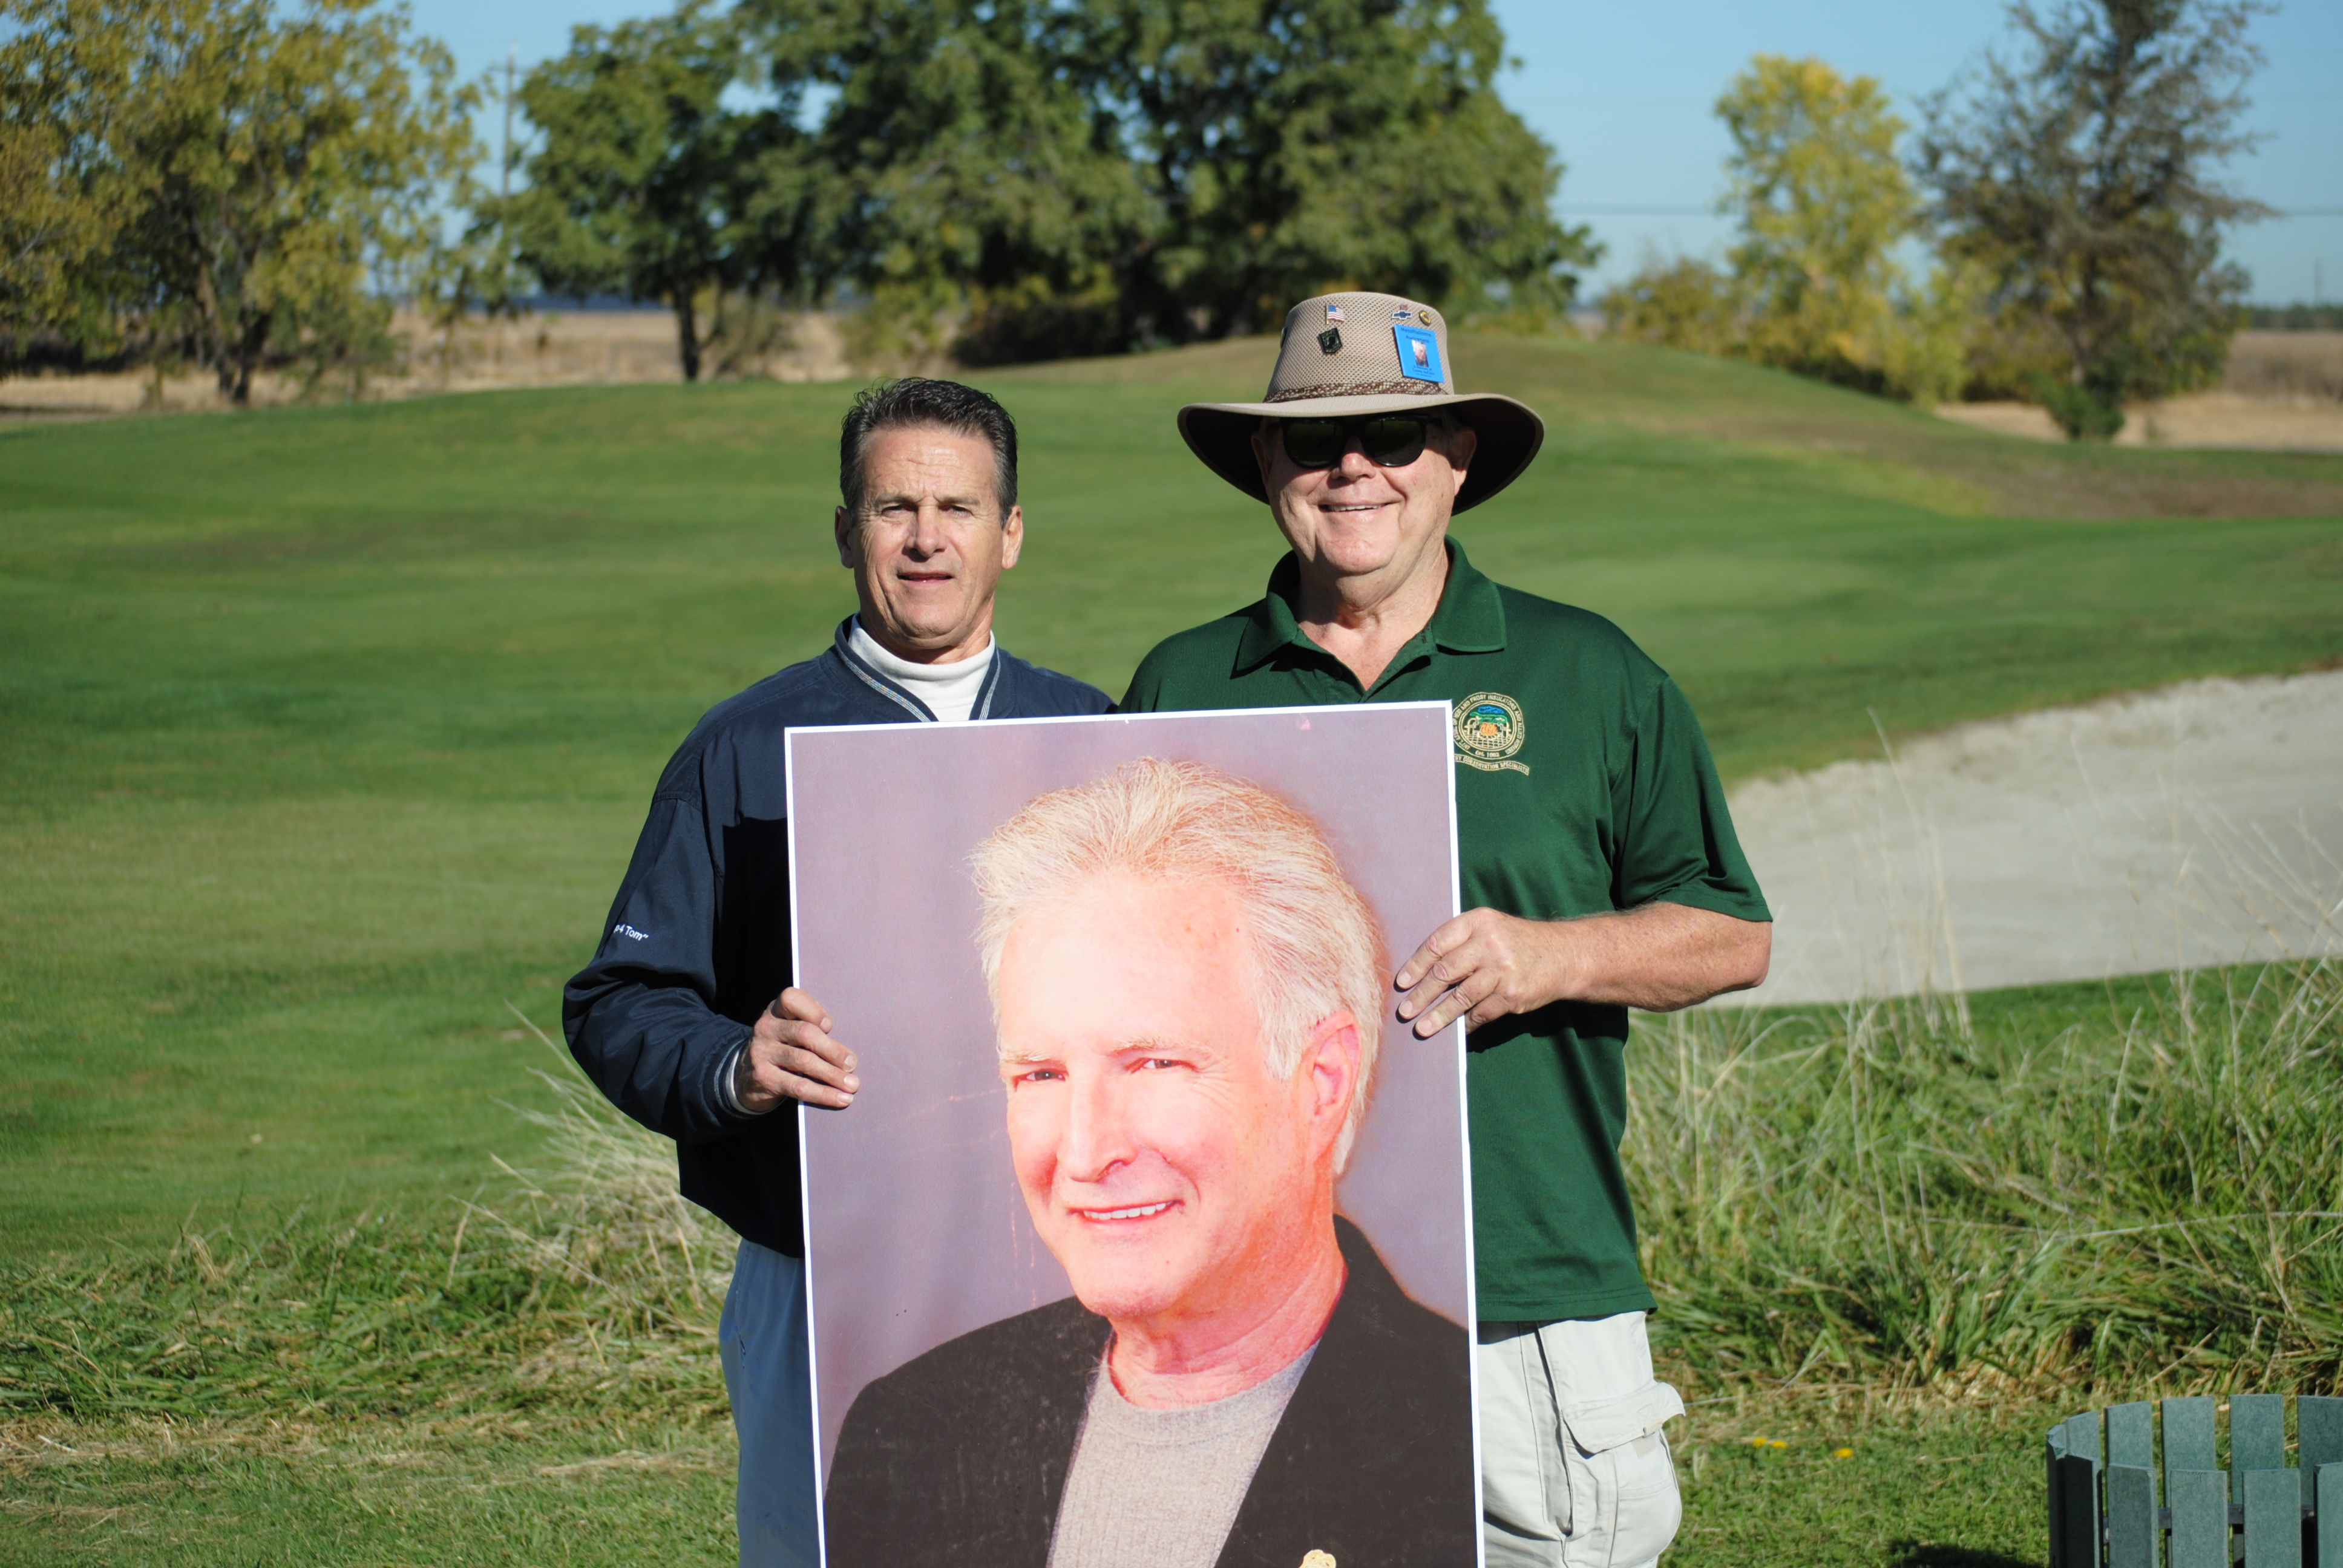 Greg Larkins and Geoff Millar of Asbestos Workers Local 16 pose with a photo of Tom Lawson during this year’s annual golf tournament.